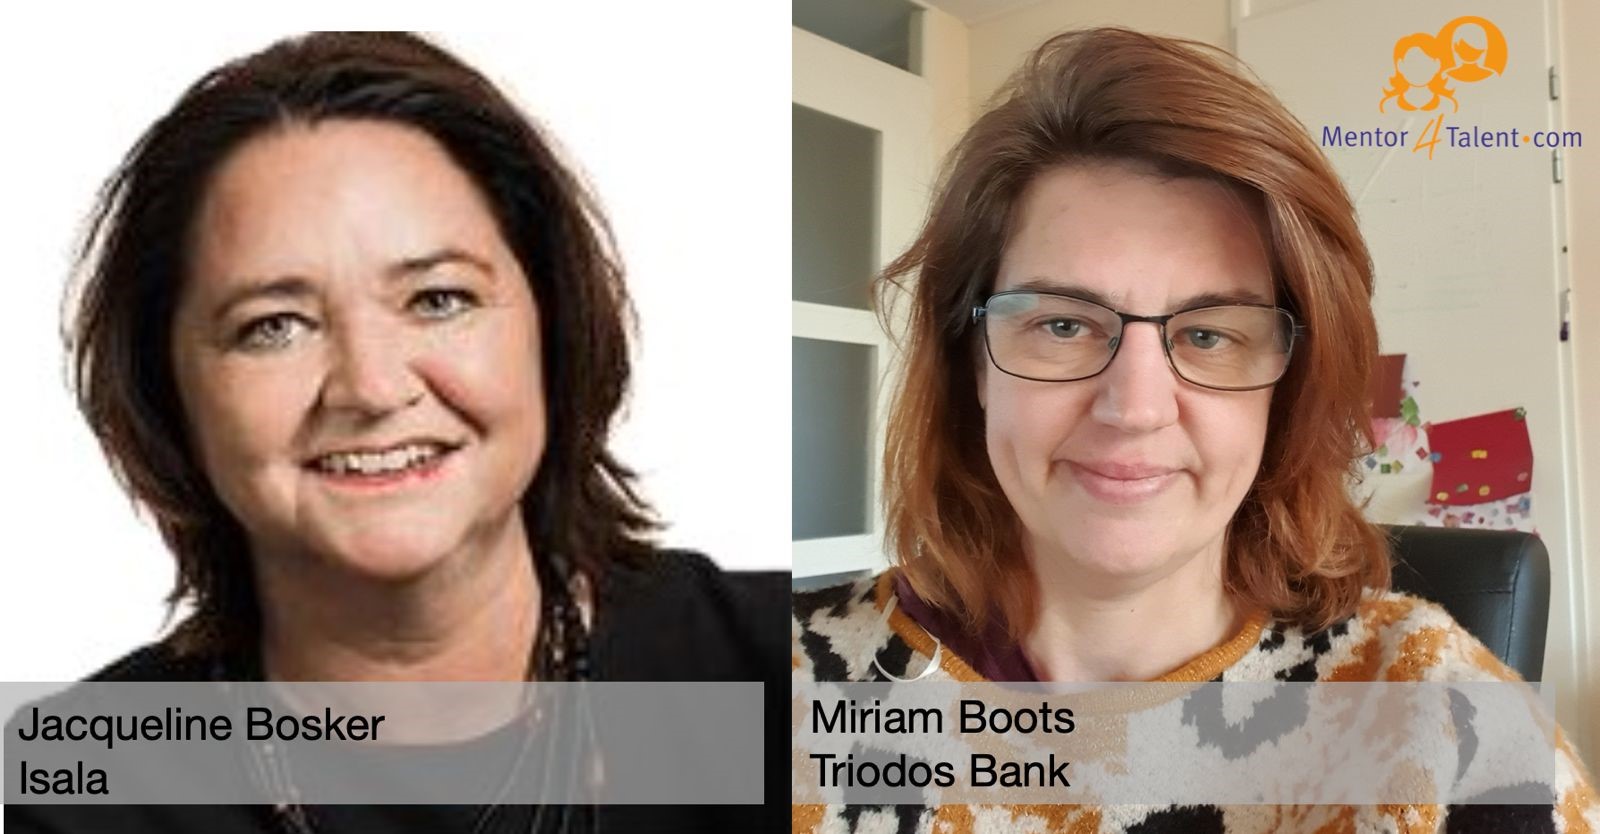 Jacqueline Bosker and Miriam Boots - Mentor4Talent